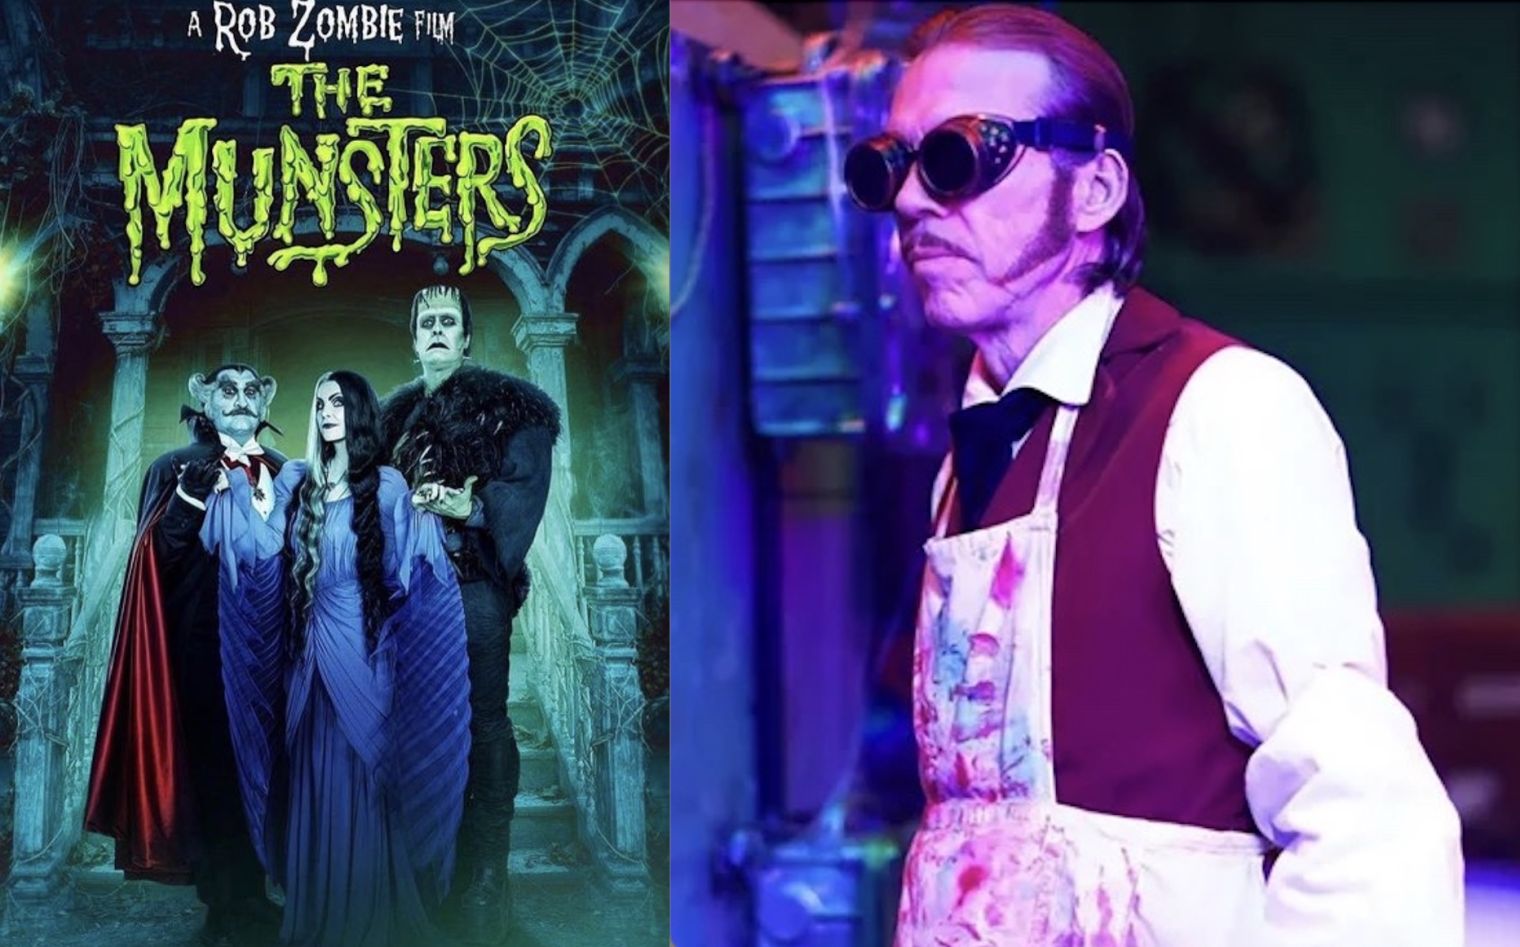 Richard Brake to star in the movie adaptation of the classic TV sitcom 'The Munsters'